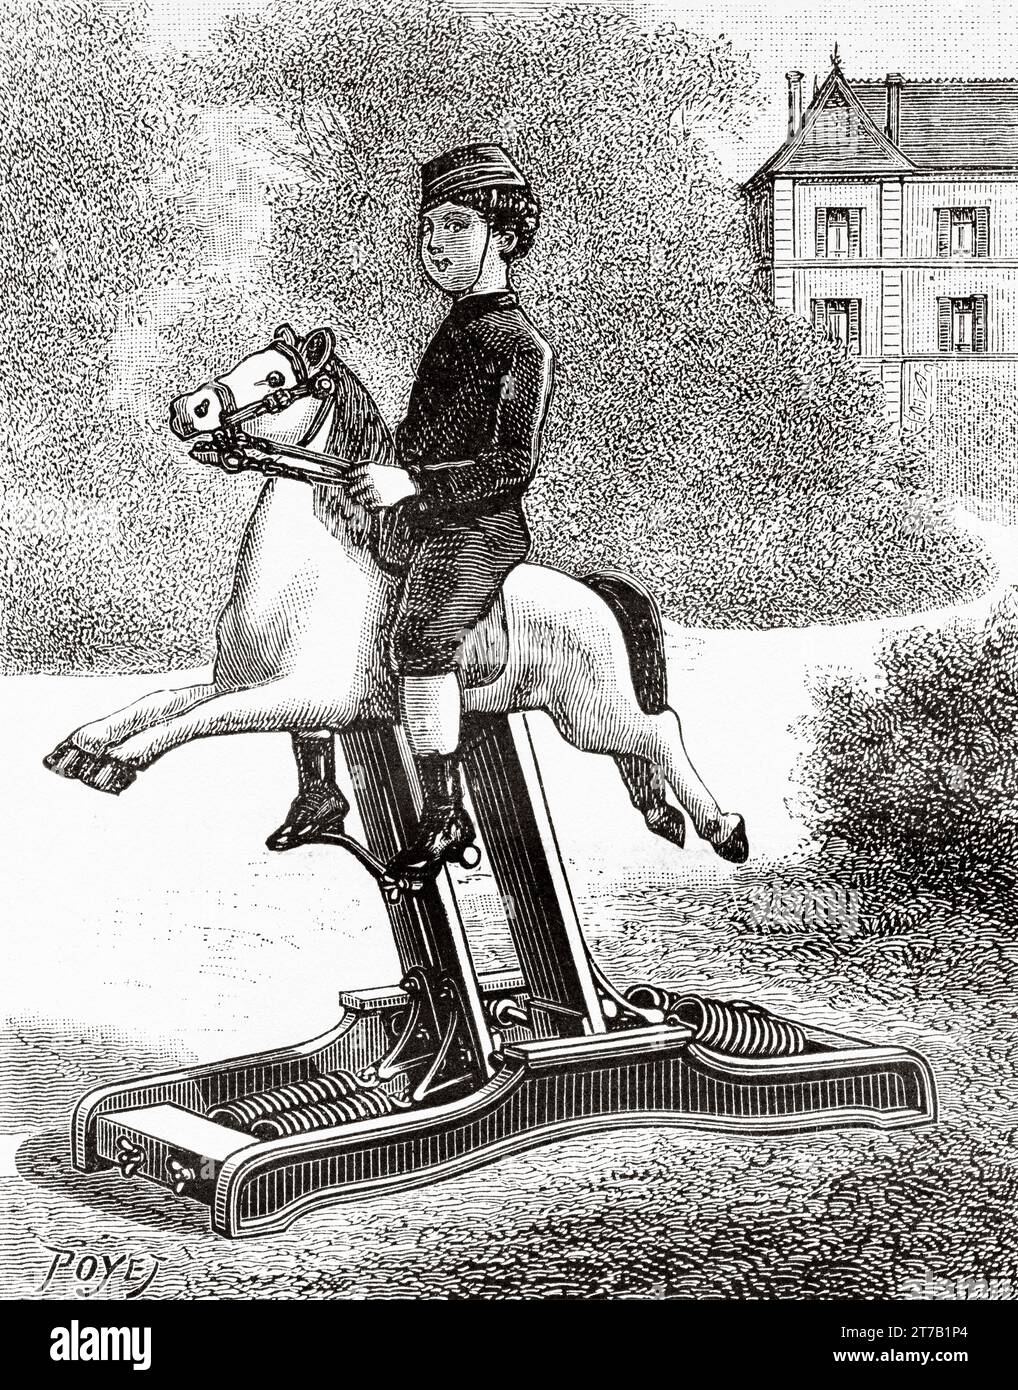 Science games, Manning wooden horse. Old illustration by Louis Poyet (1846-1913) from La Nature 1887 Stock Photo